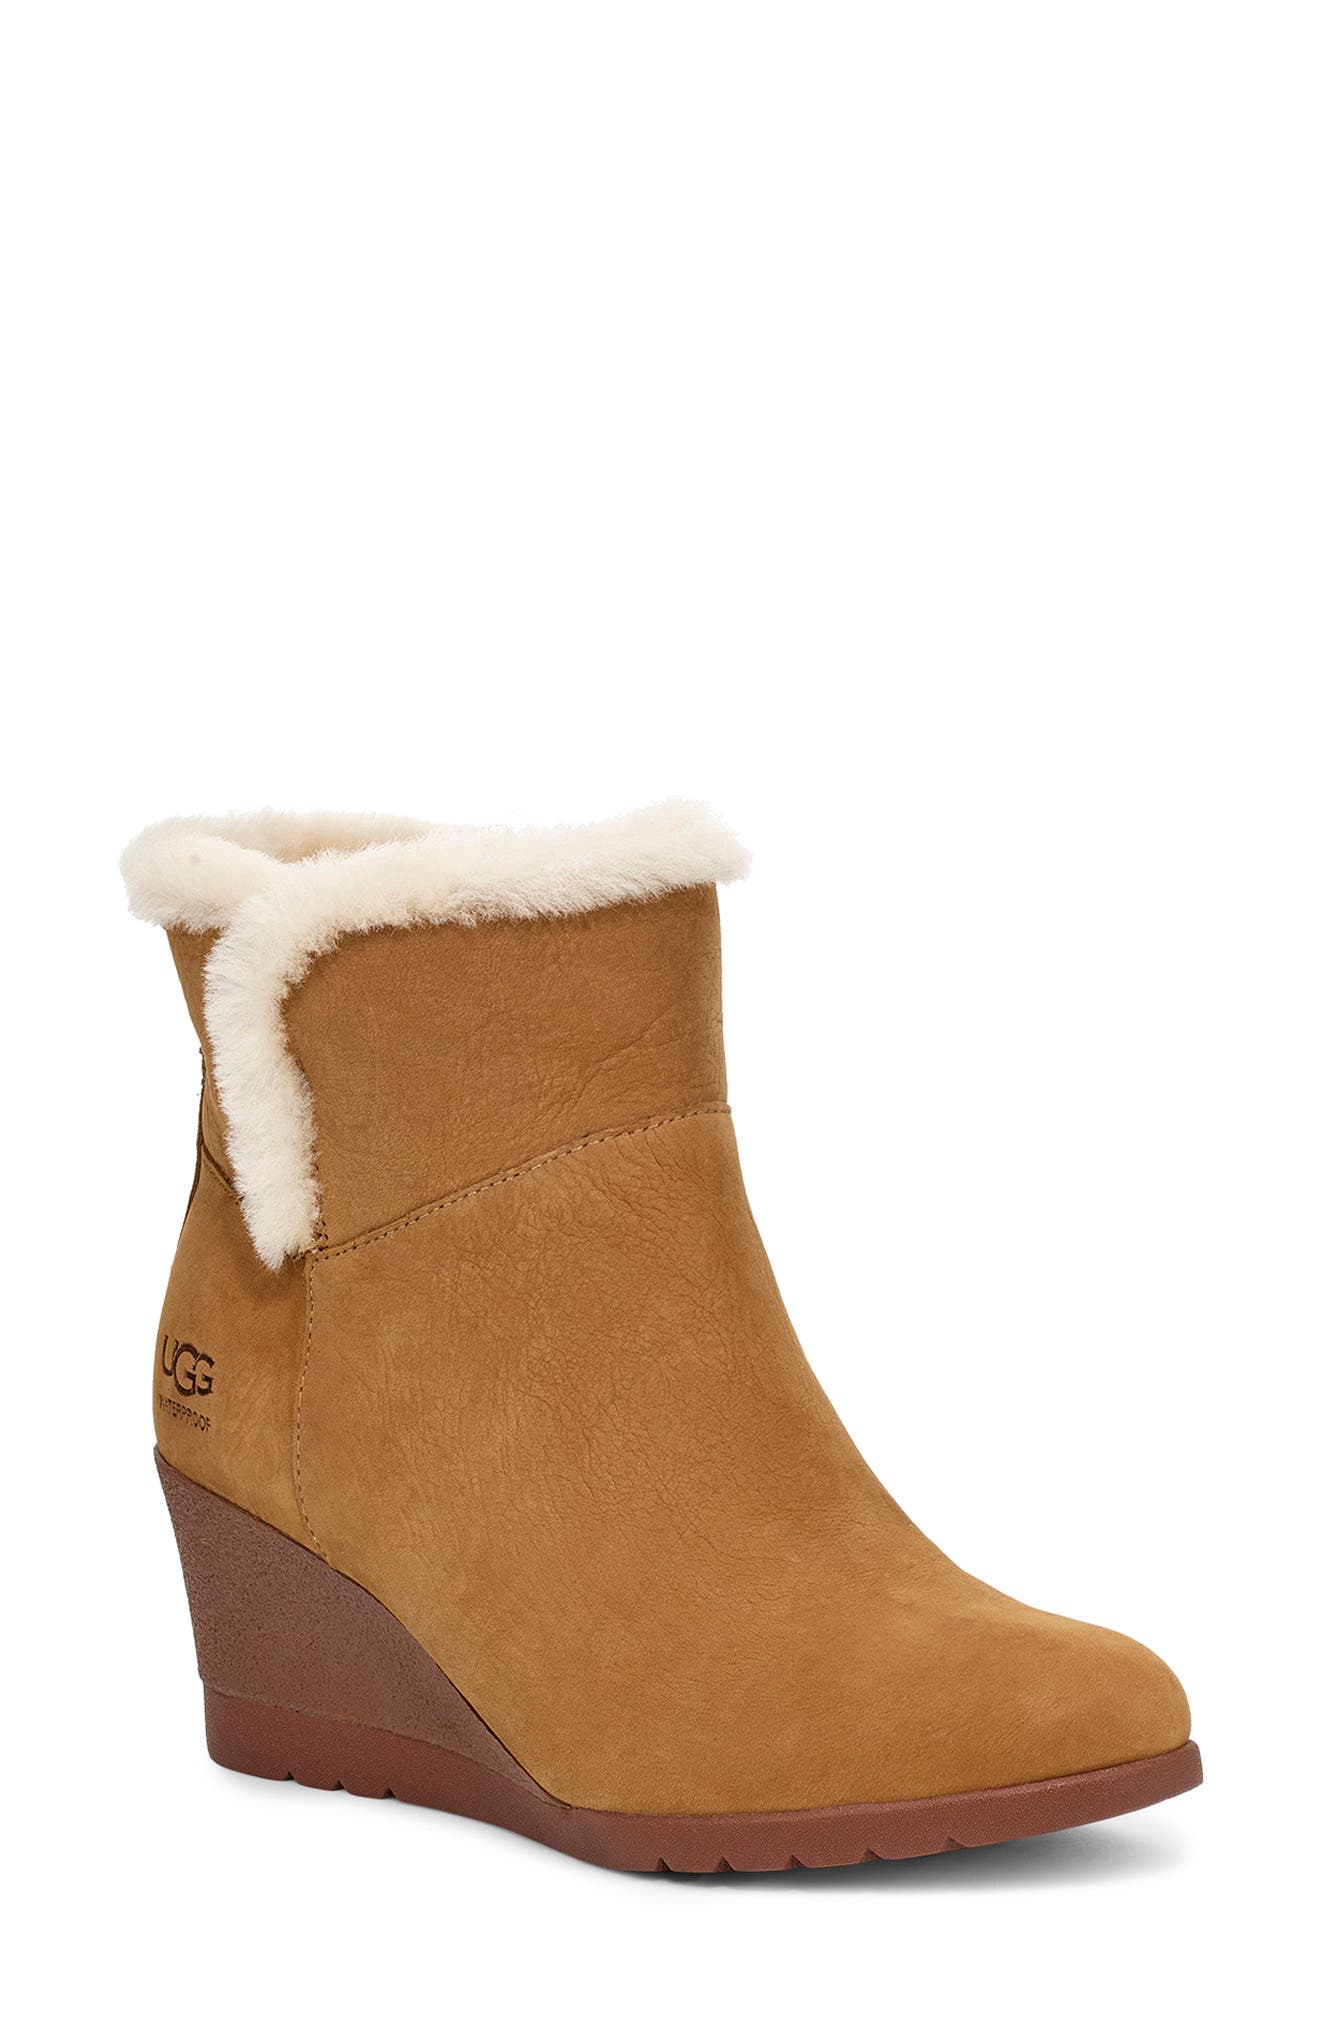 uggs wedge boots